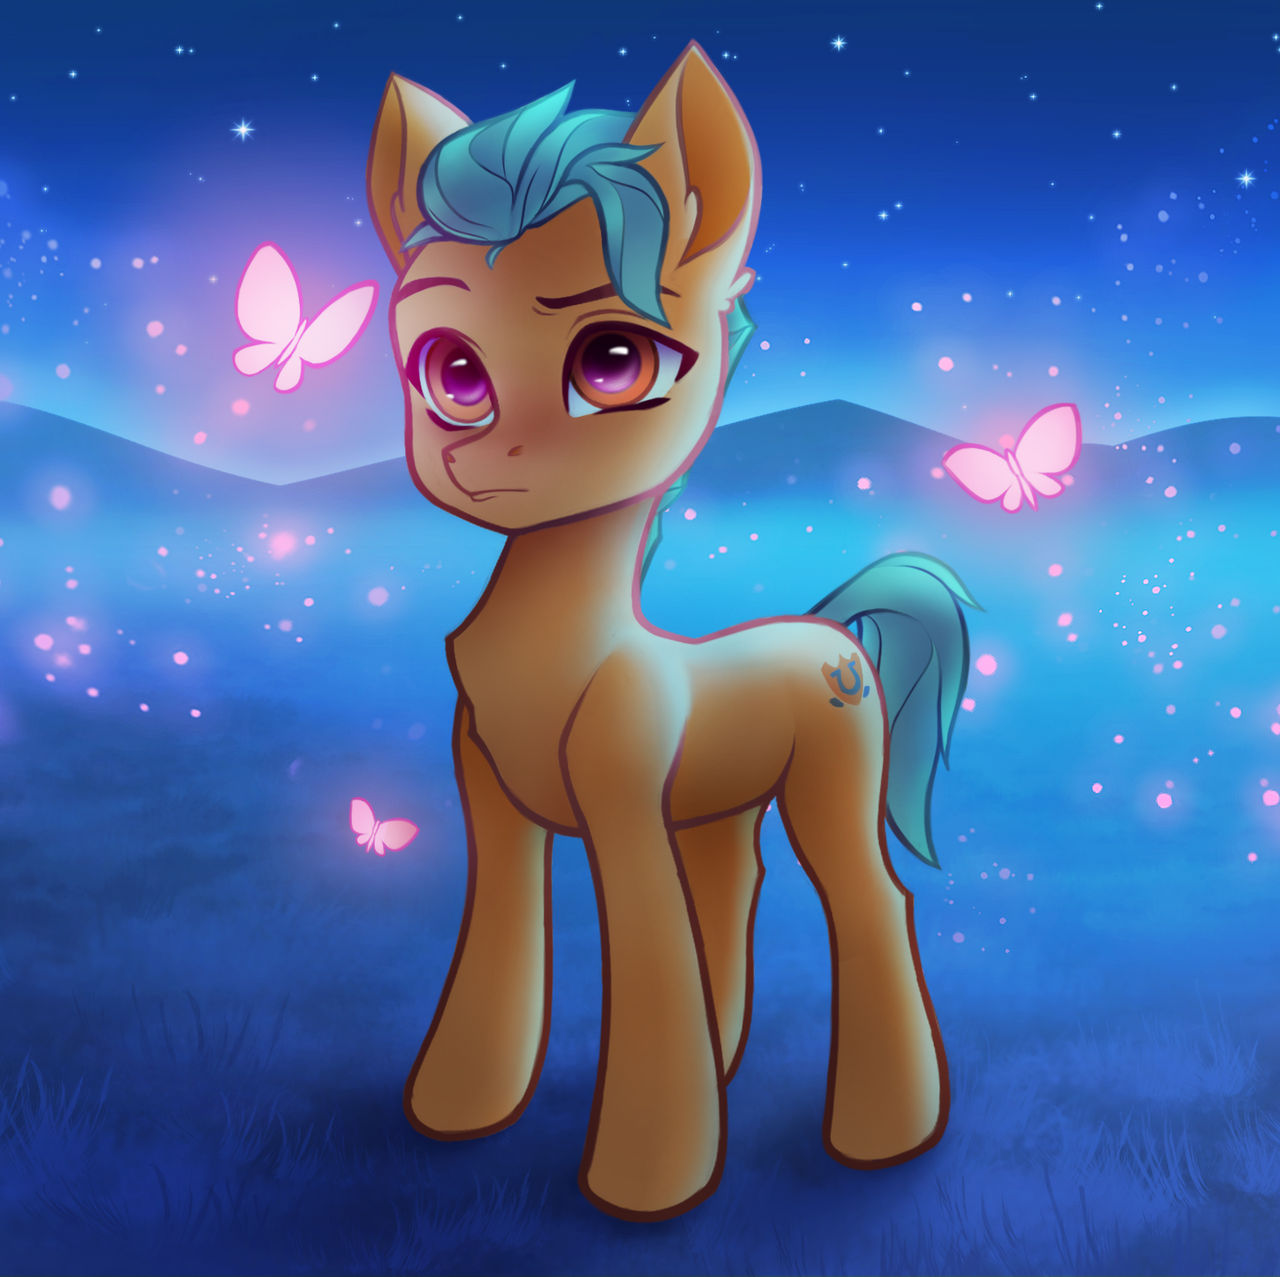 hitch_and_magic_butterflies_by_omnanya_df38d14-fullview.jpg